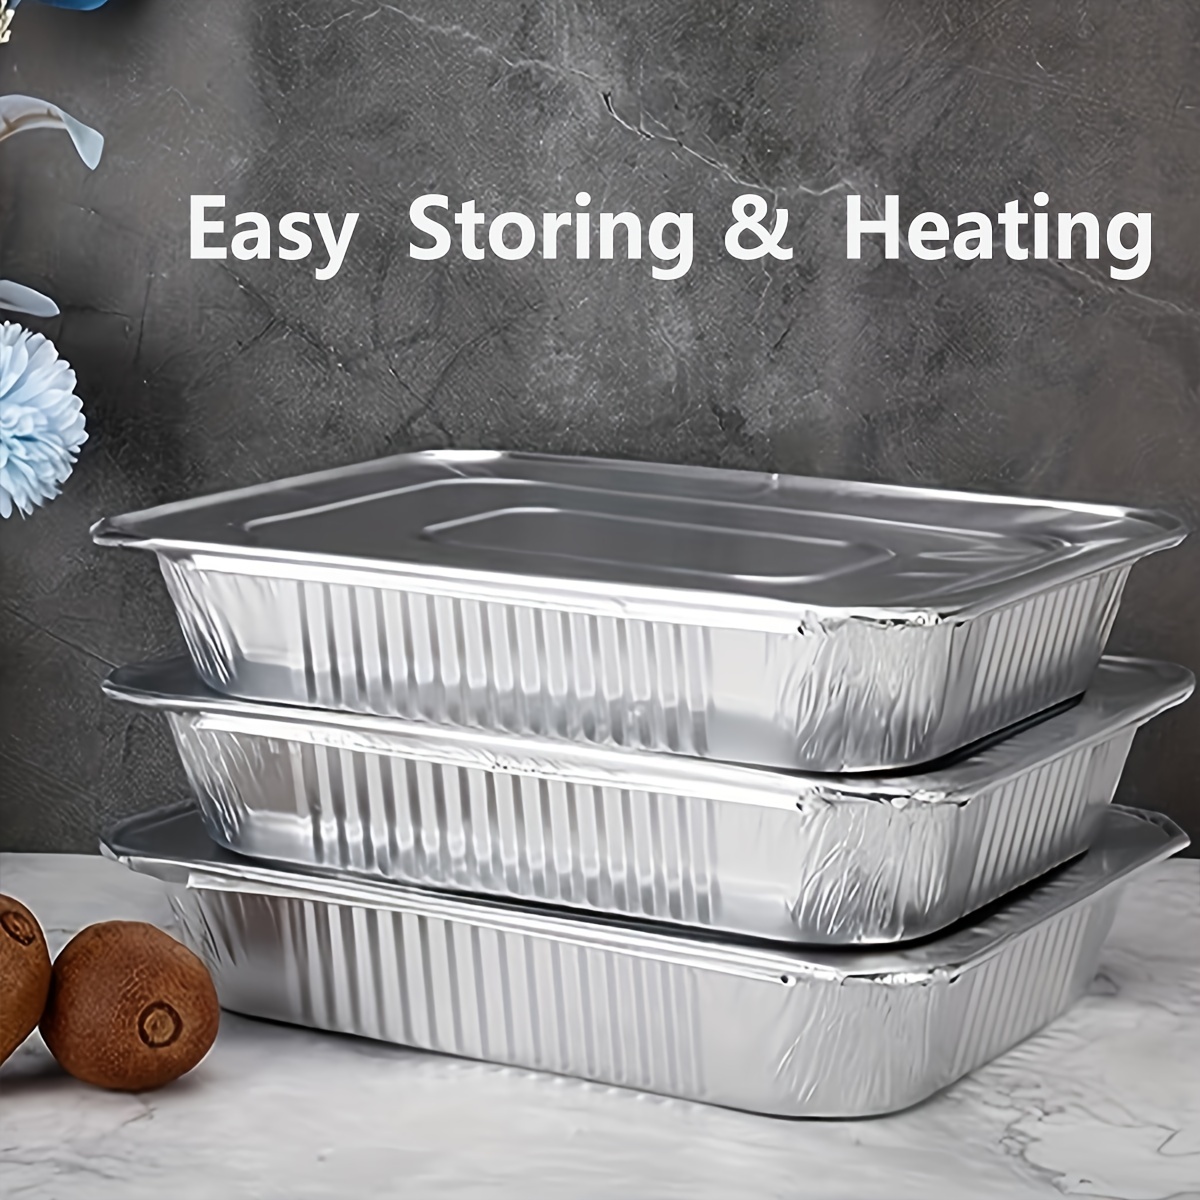 8pcs Foil Pans With Aluminum Lids Aluminum Pans With Sealing Cover For Safe  Heating As Food Containers Great For Baking, Cooking, Heating, Prepping F